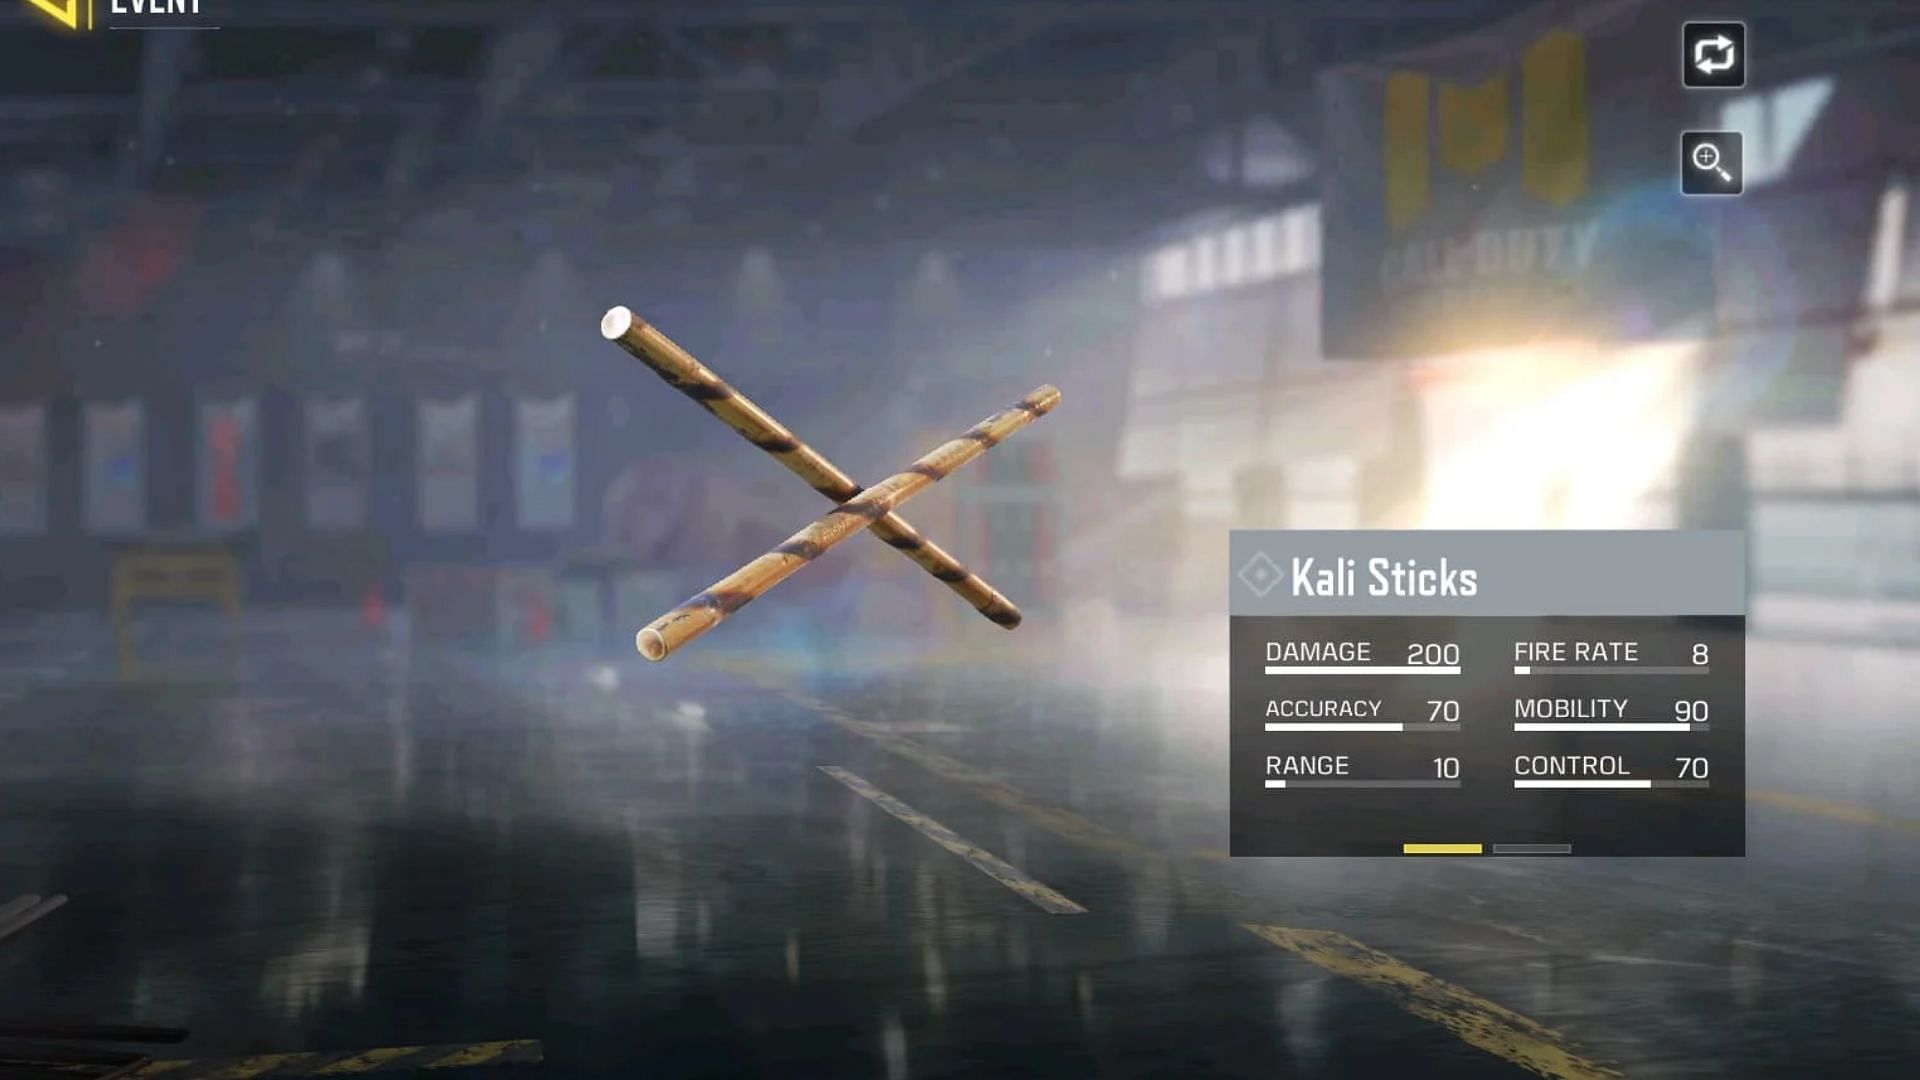 Kali Sticks have been launched in COD Mobile Season 4: Wild Dogs and players can unlock it for free by completing a few challenges (Image via Call of Duty: Mobile)